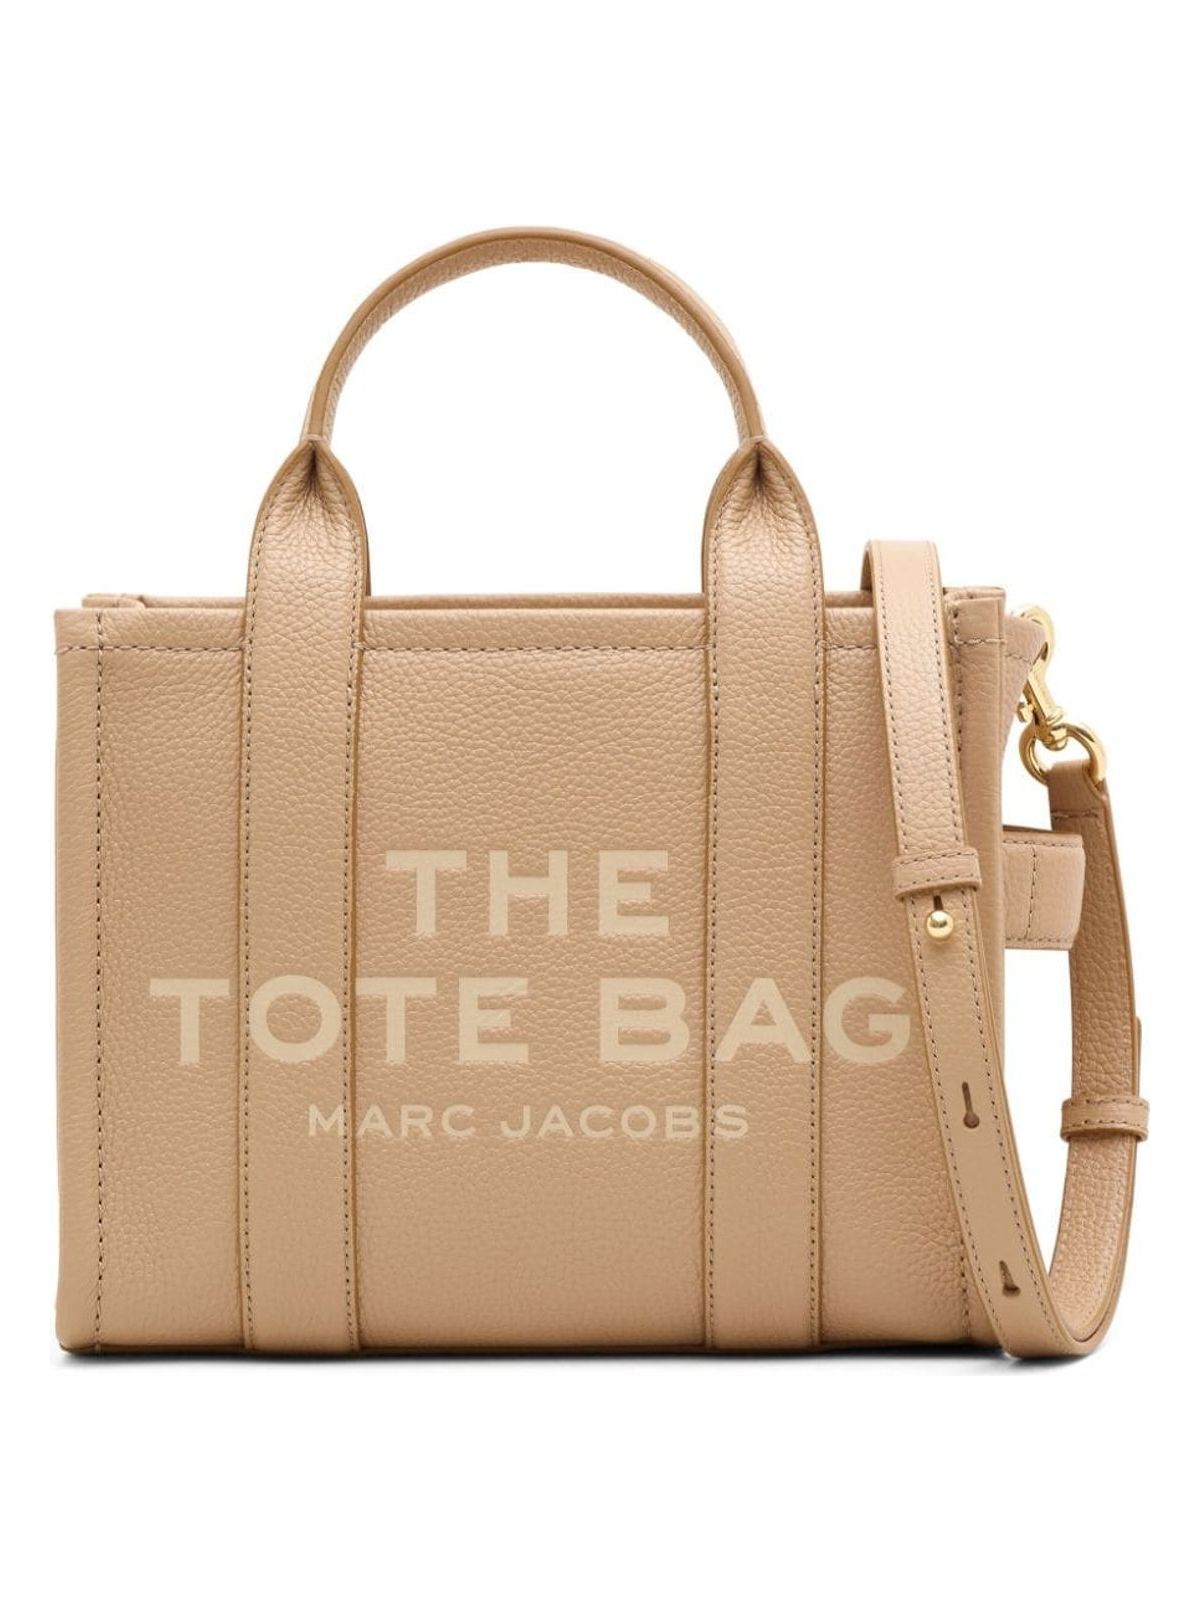 230 MARC JACOBS THE TOTE BAG